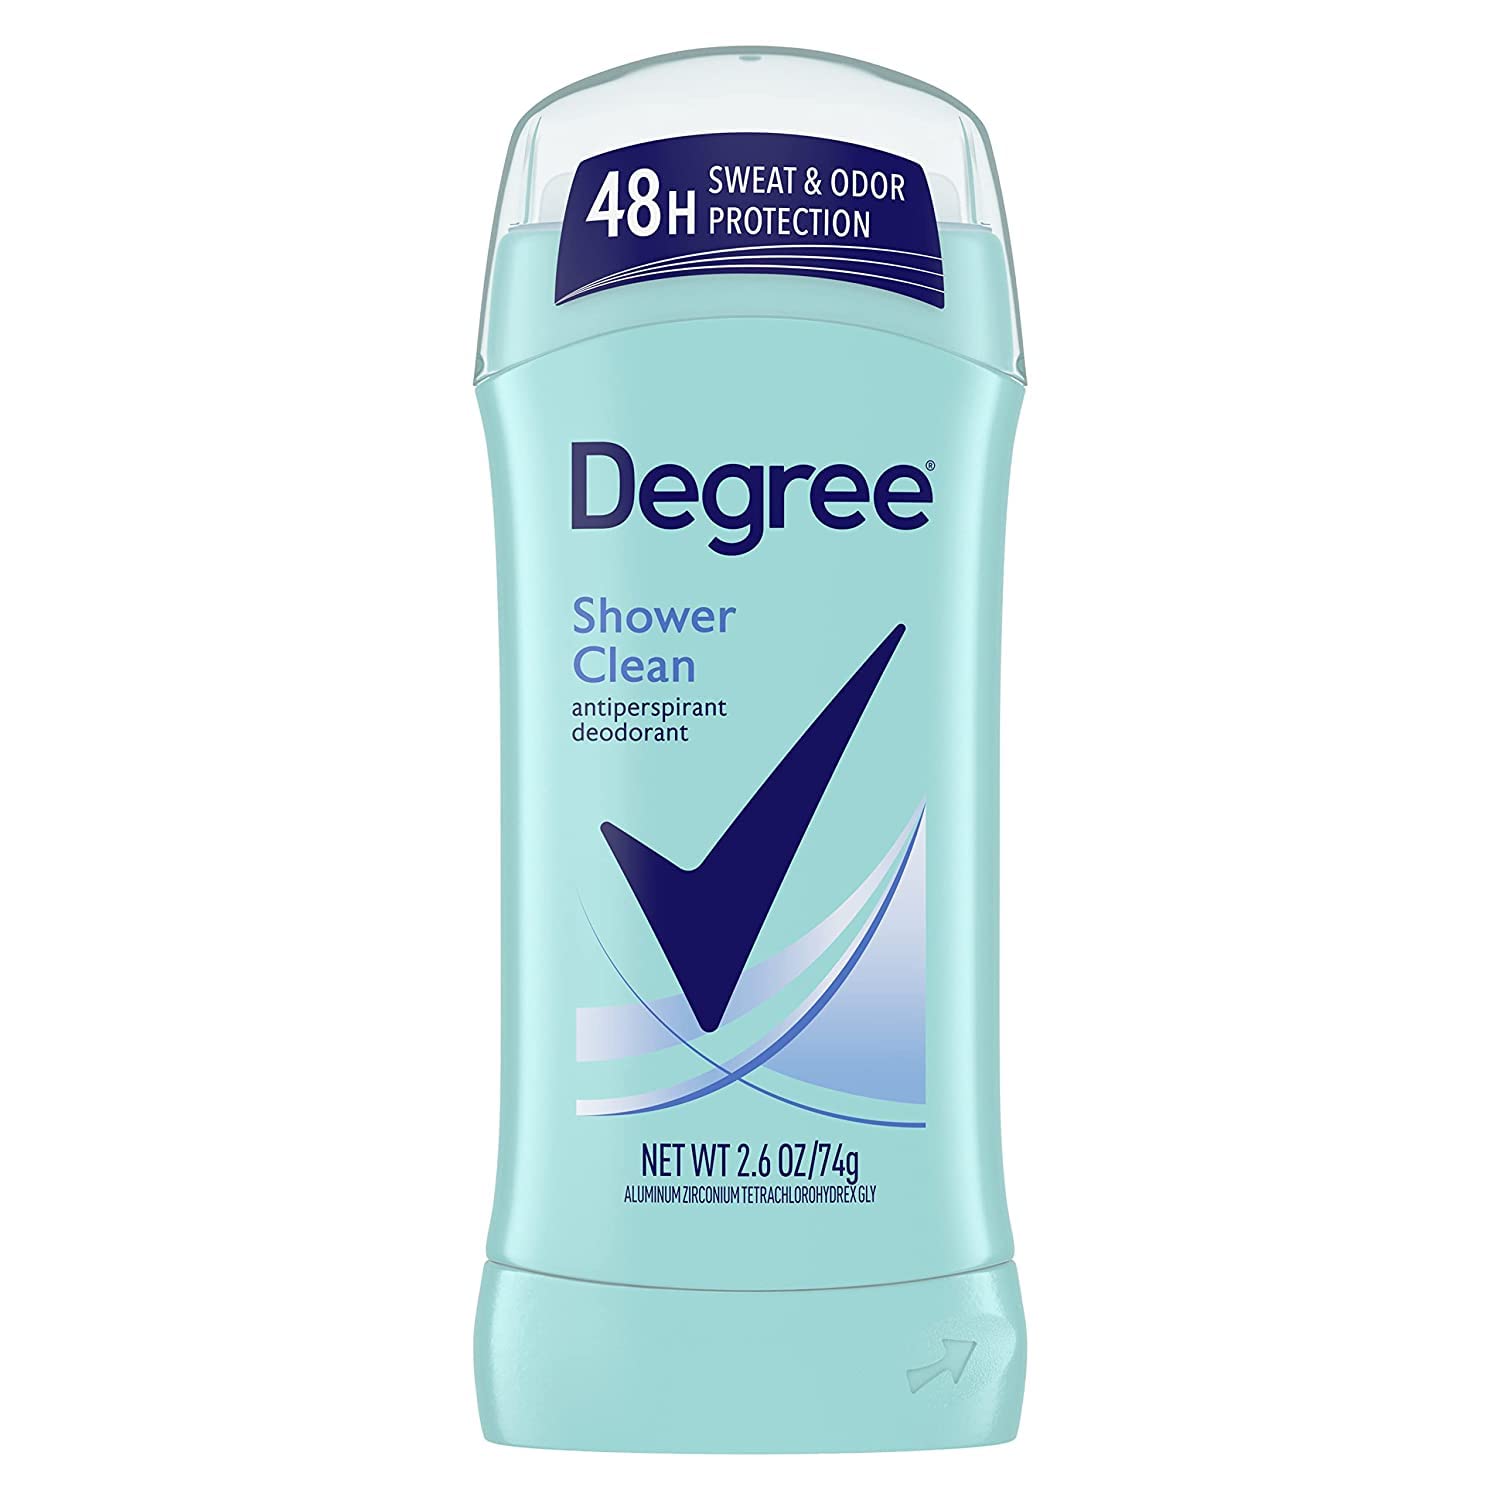 Degree Advanced Antiperspirant Deodorant Shower Clean, 48-Hour Sweat & Odor Protection Antiperspirant for Women with MotionSense Technology 2.6 oz(Pack of 6)